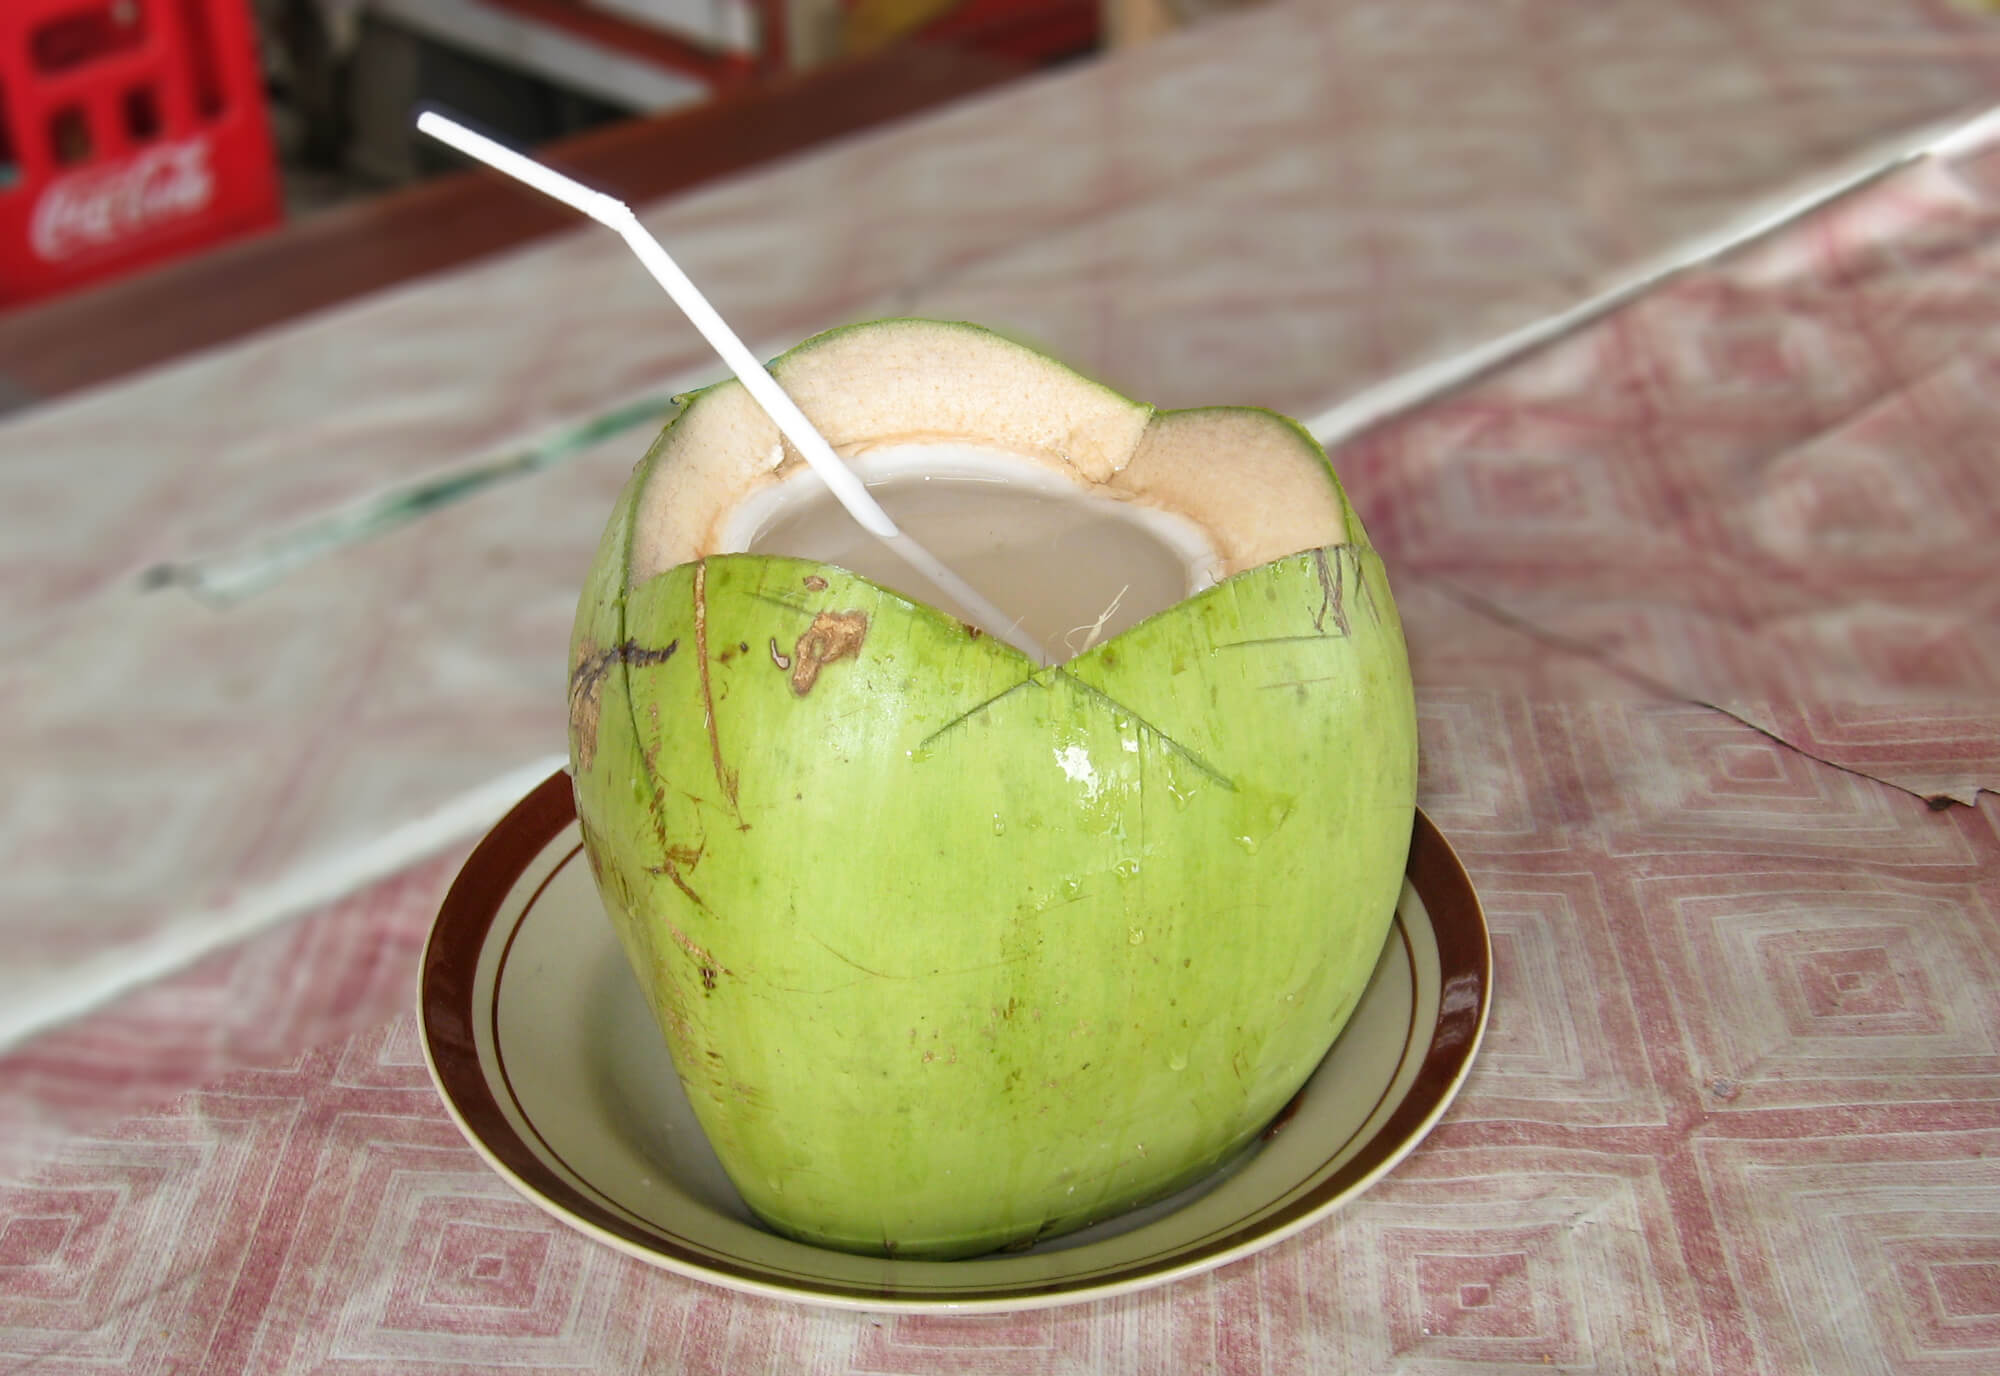 Know how coconut water is beneficial for health